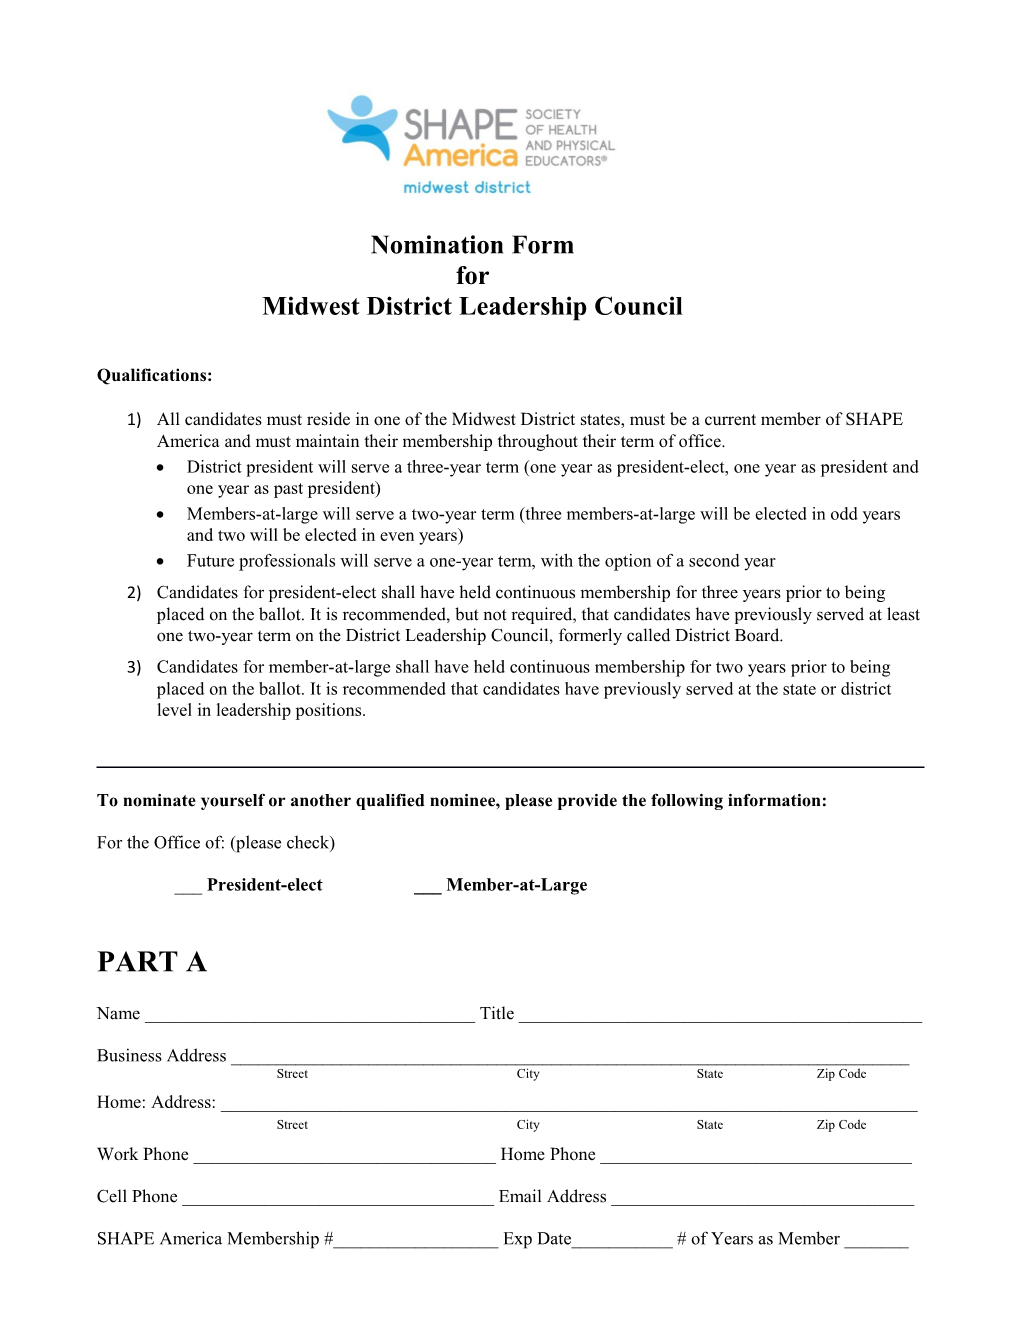 Nomination Form for Midwest District Leadership Council